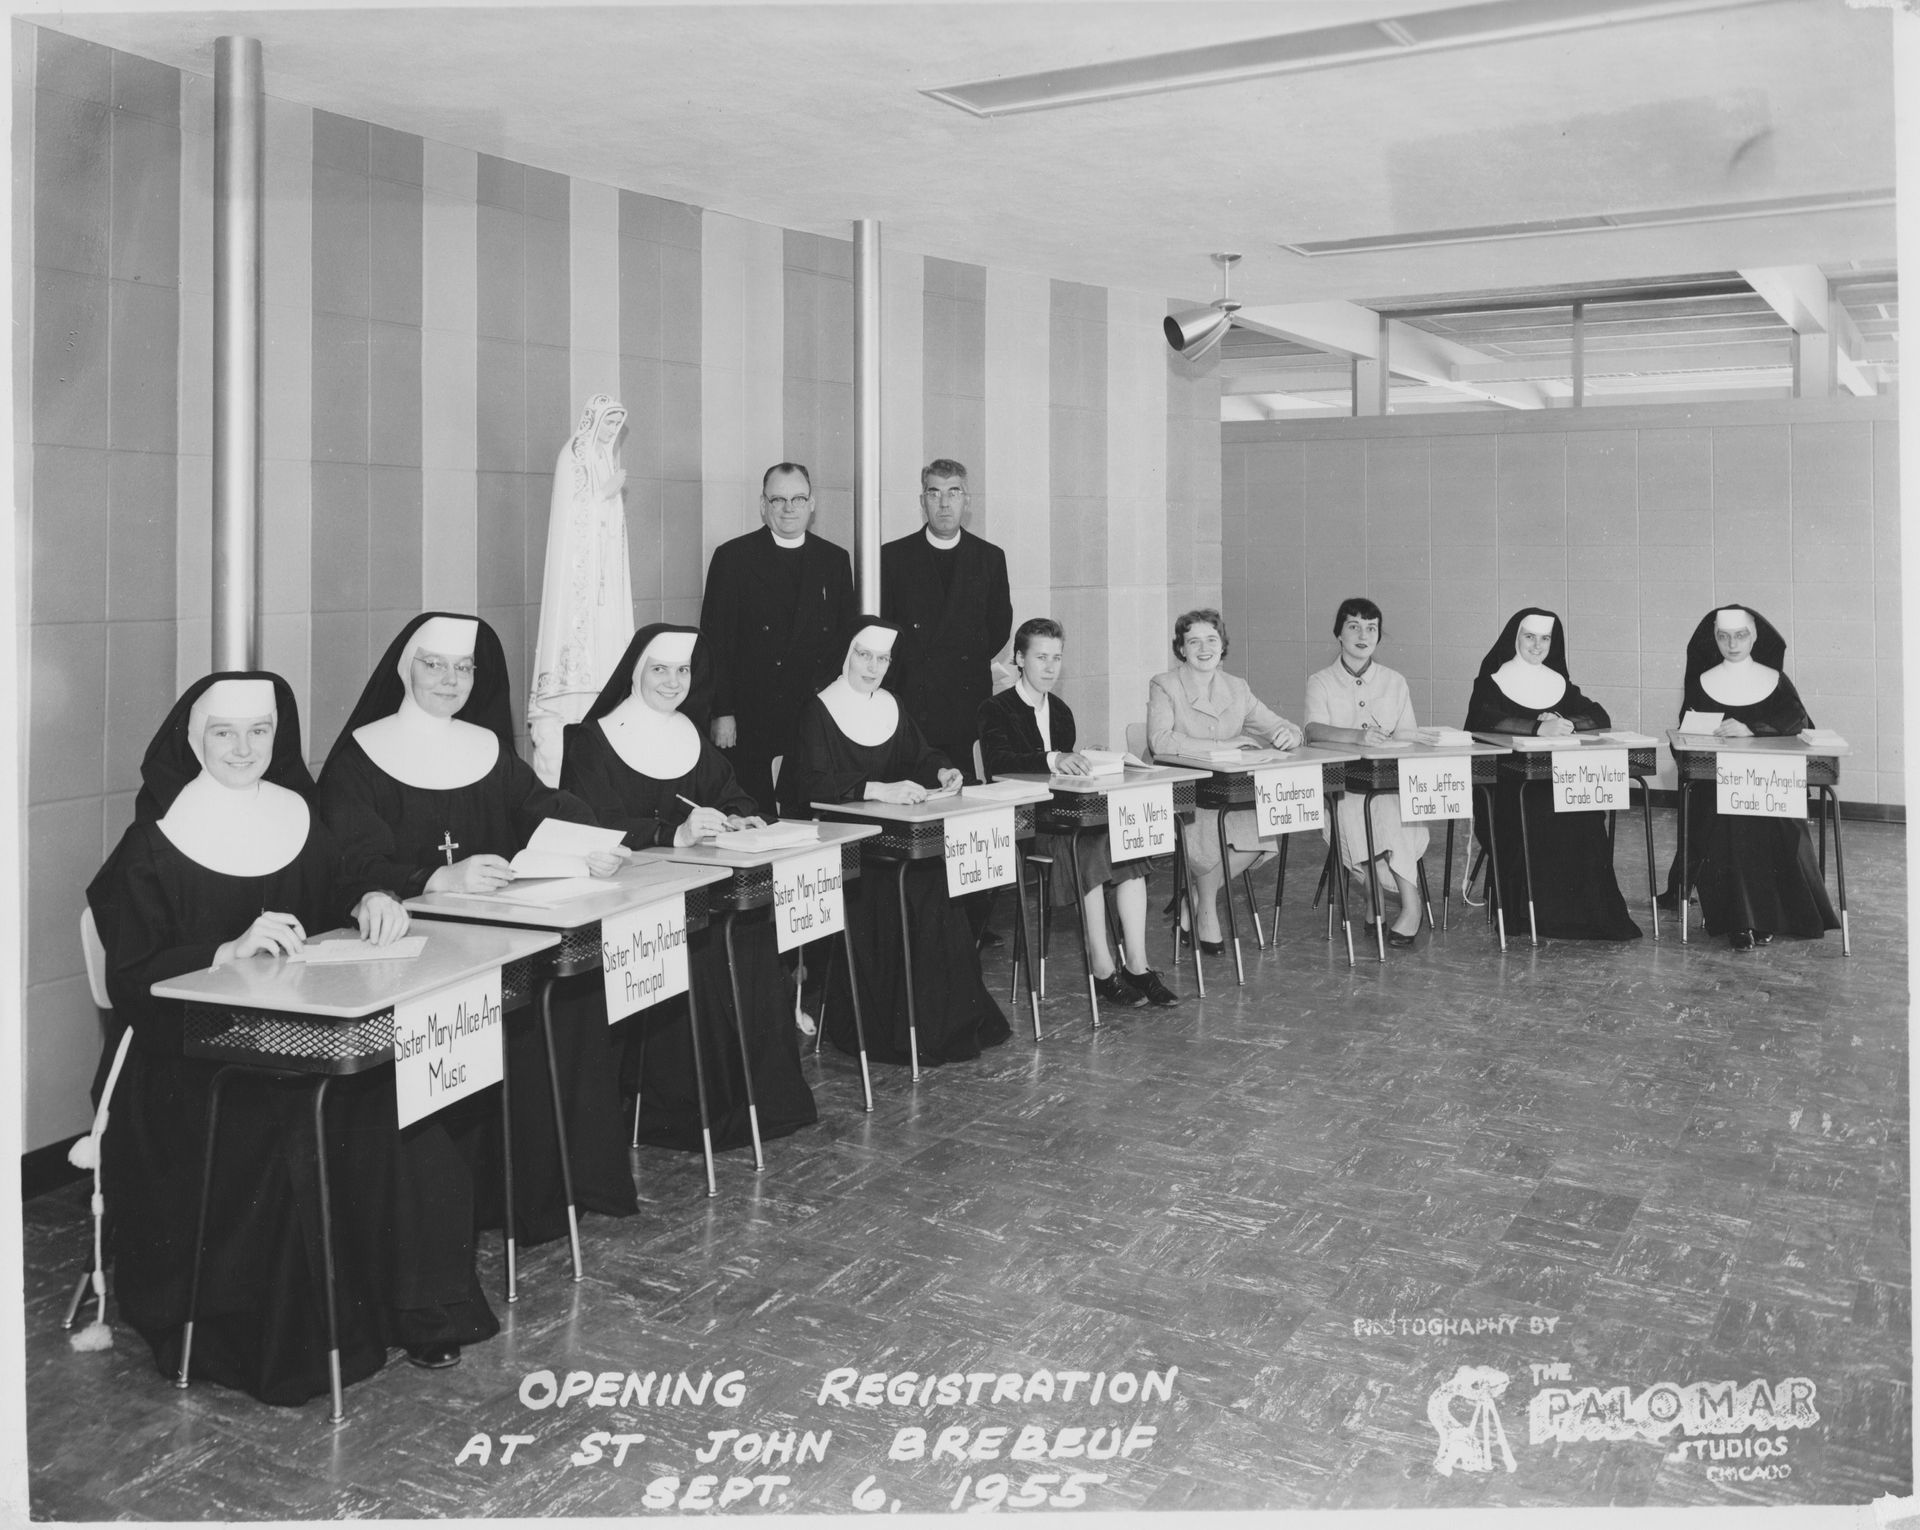 Staff on Opening Registration Day in 1955